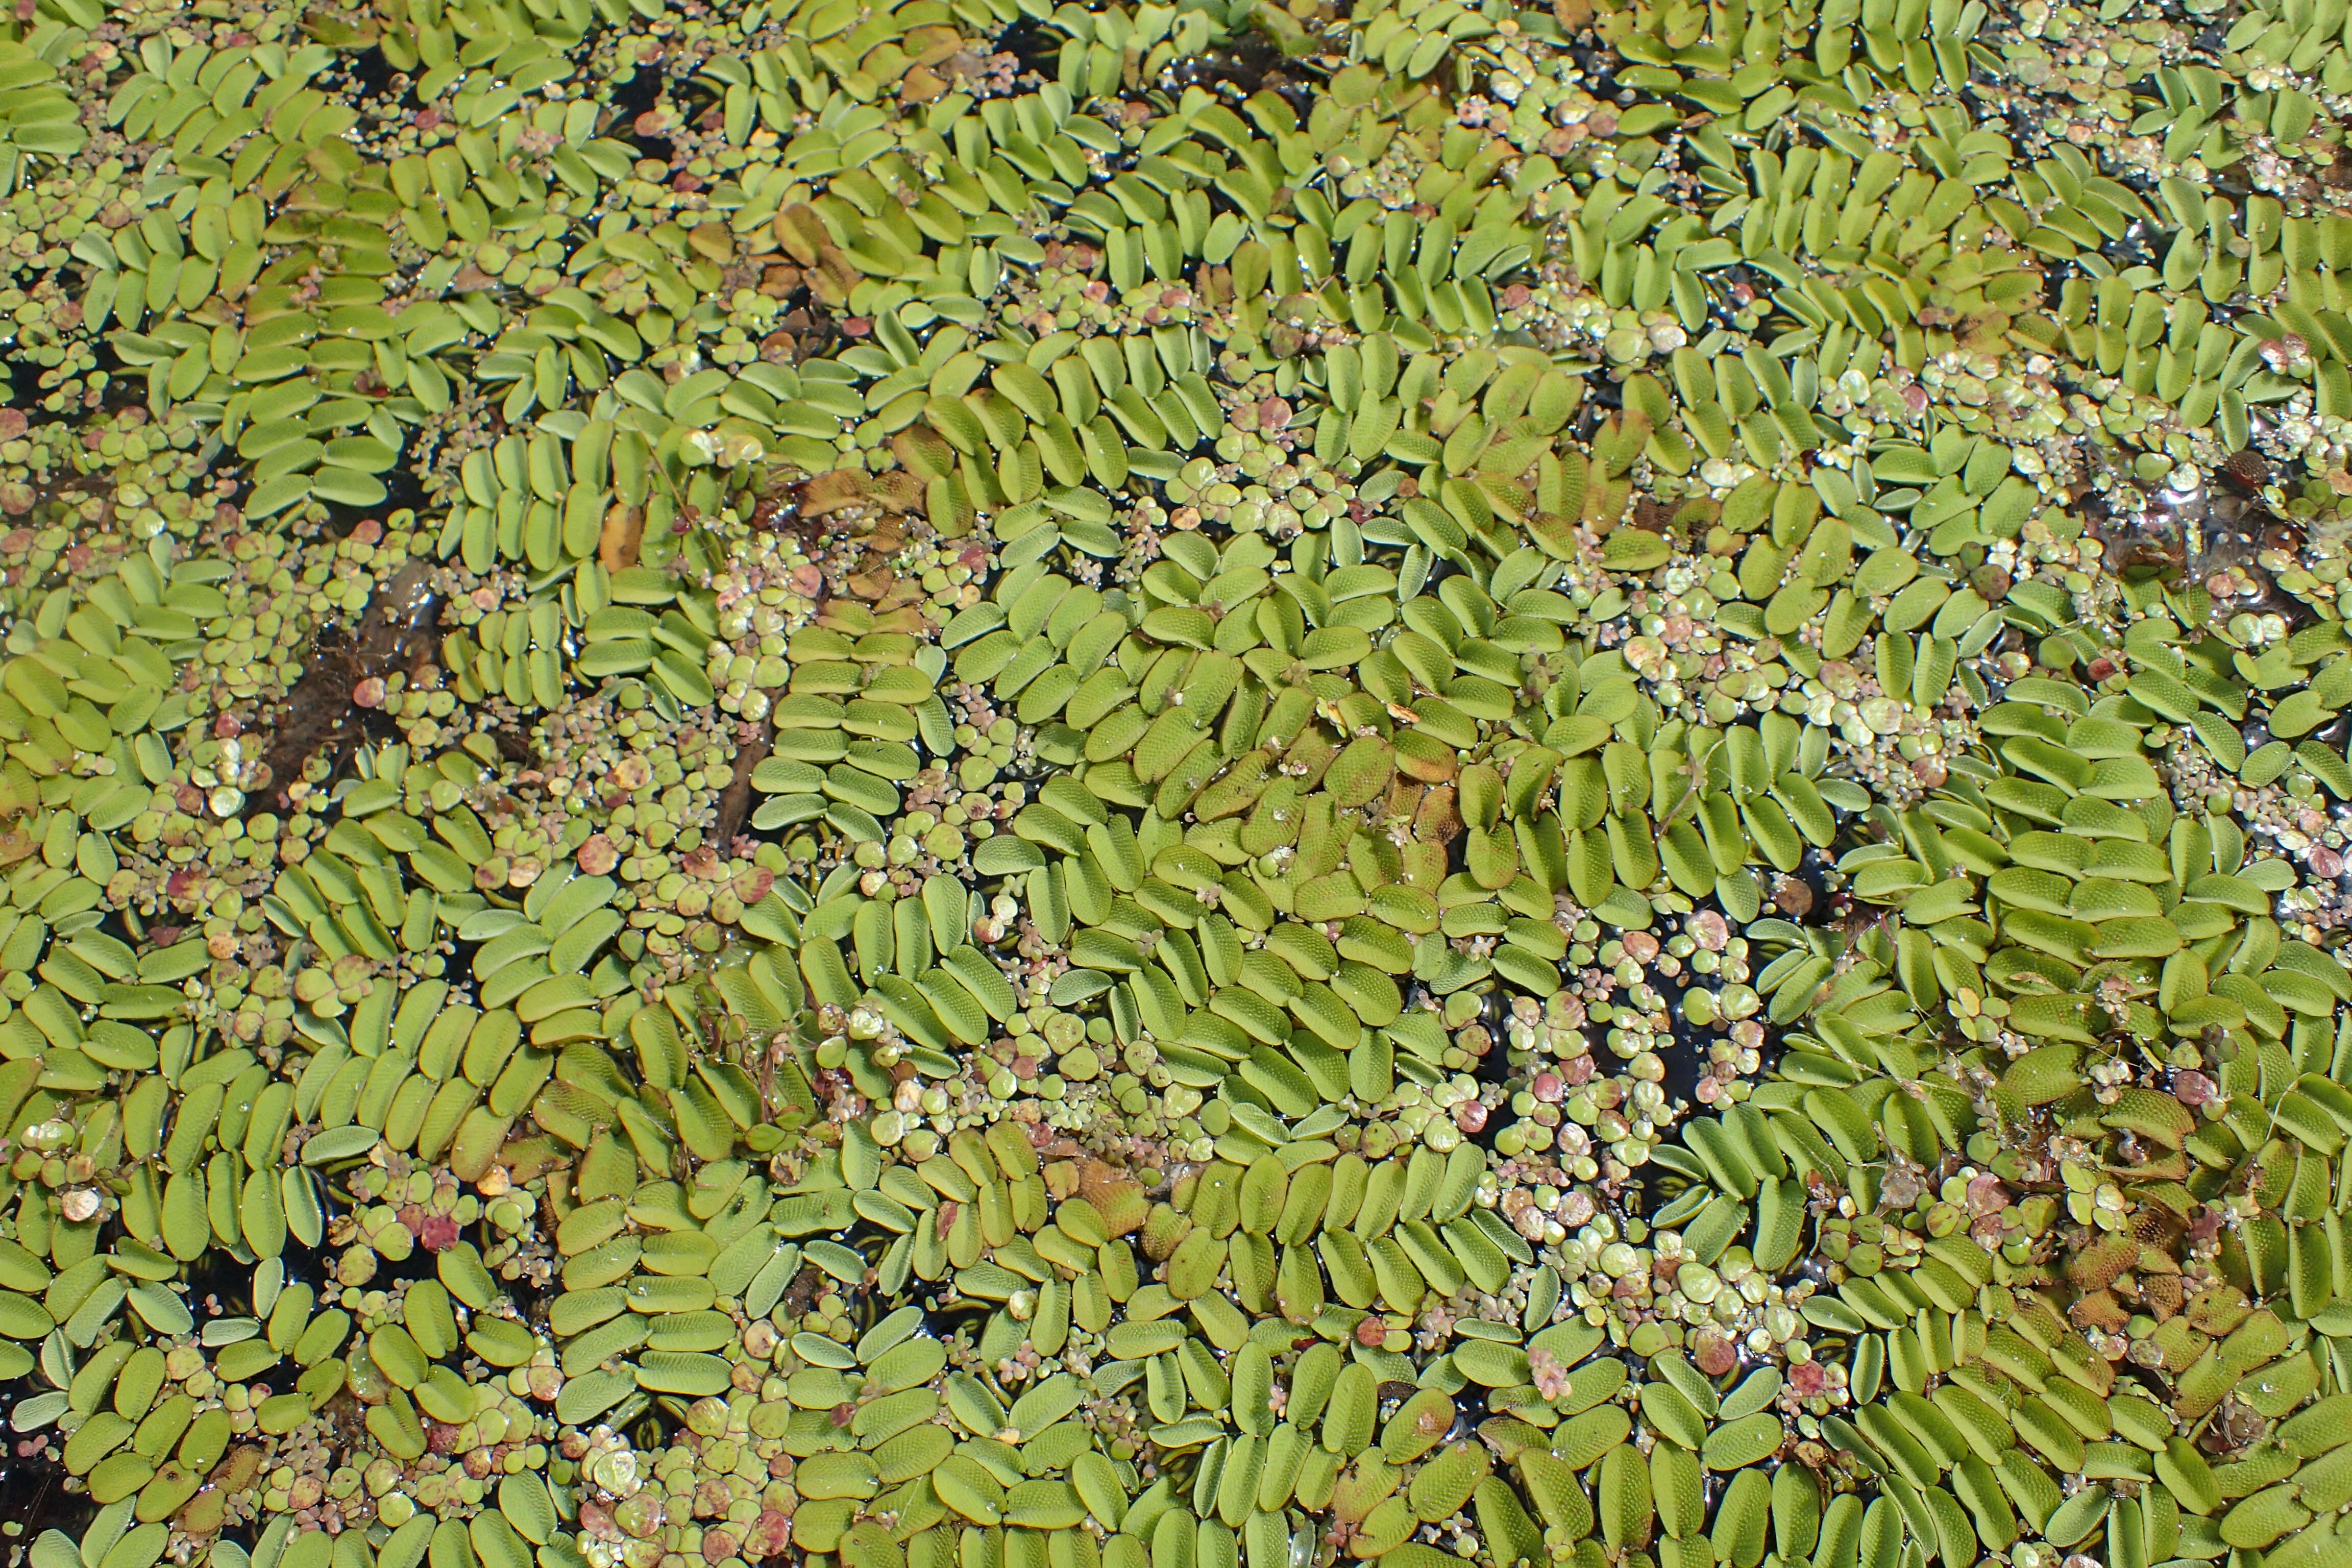 Image of floating watermoss